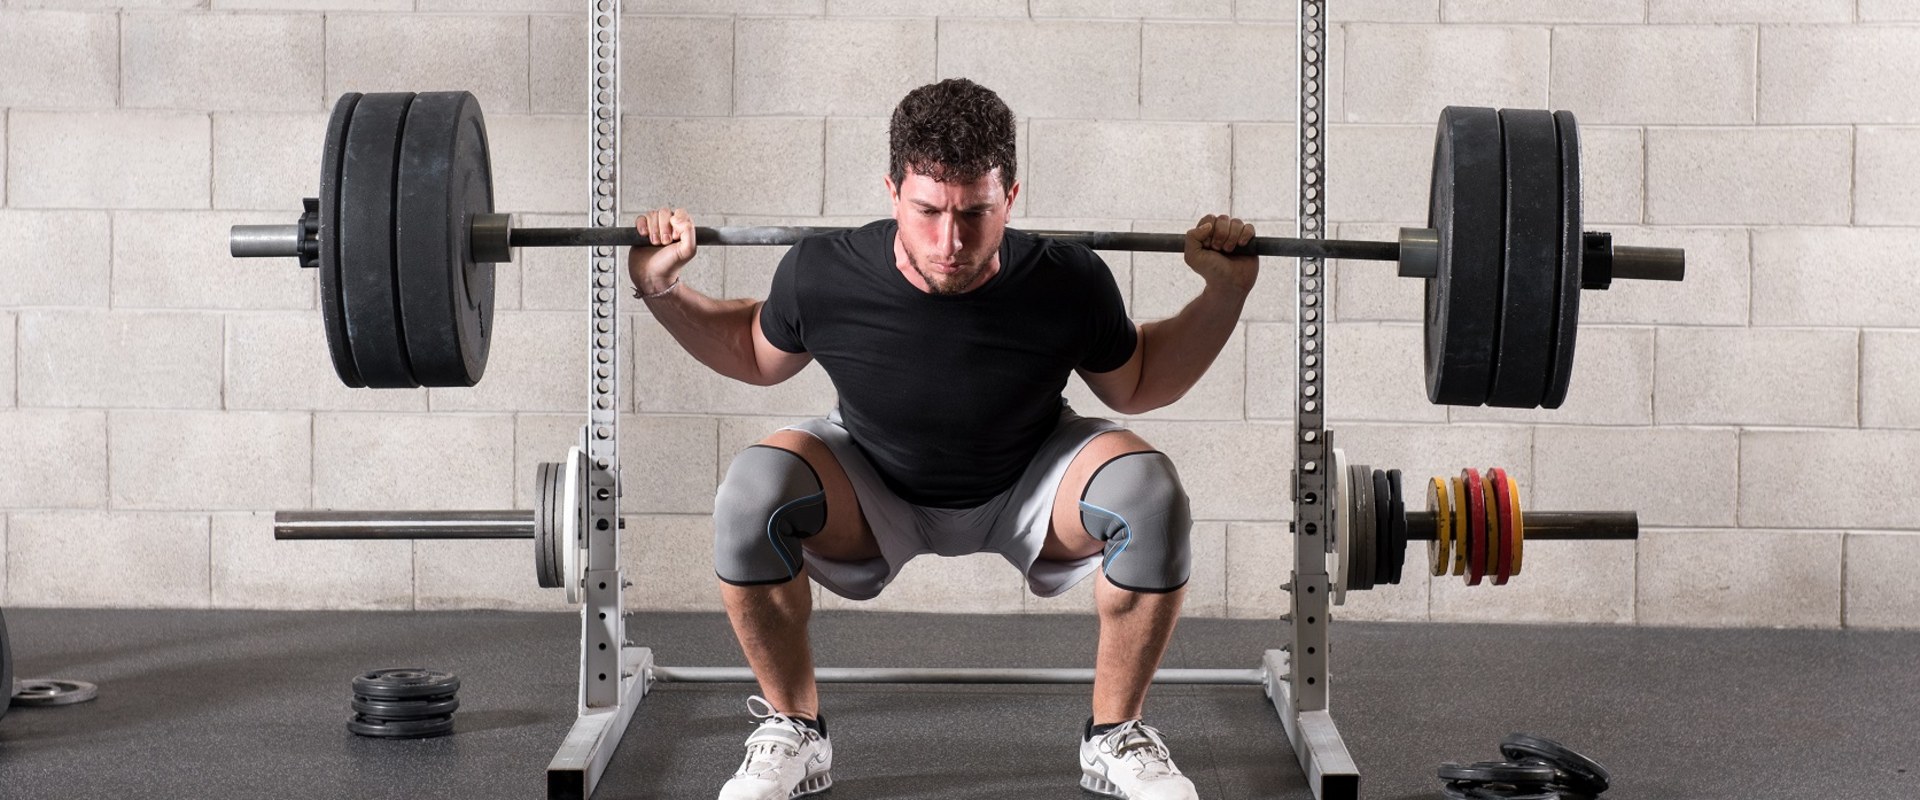 Squats: An In-Depth Look at the Popular Weightlifting Exercise